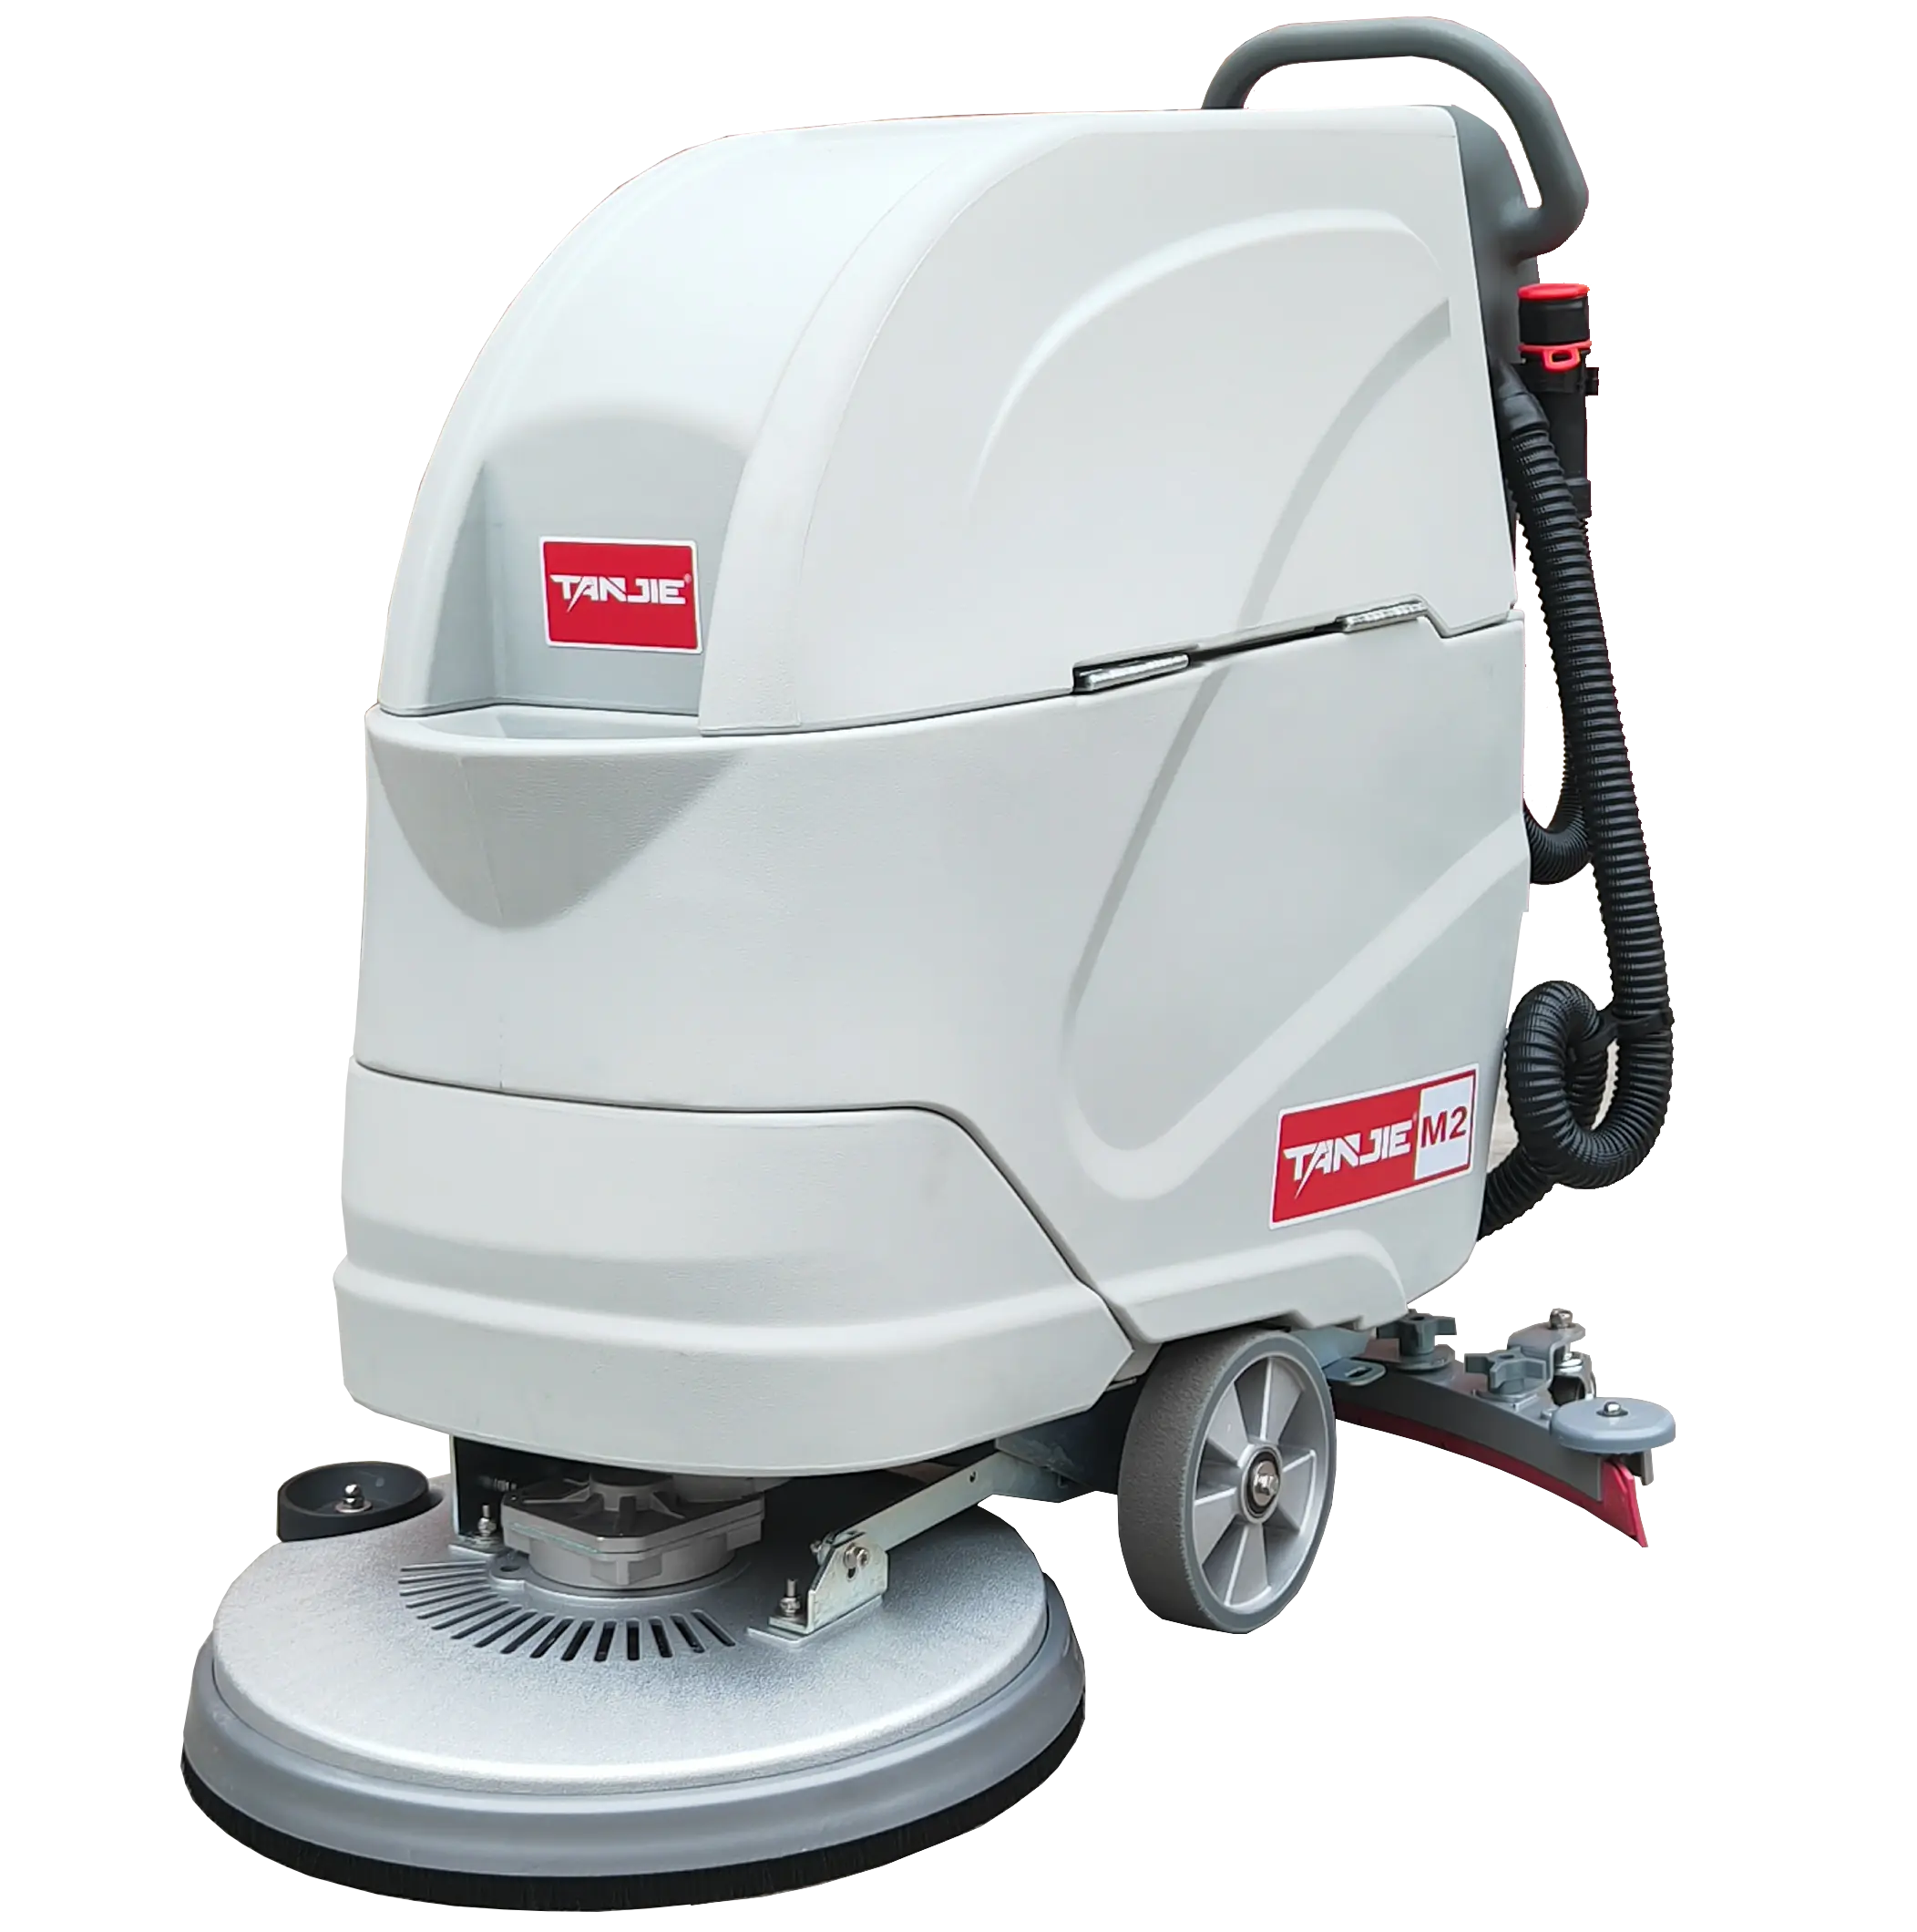 Commercial Floor Cleaner Battery Powered Floor Scrubber Dryer 21 inch brush 31 inch Squeegee Width 55 L Tank